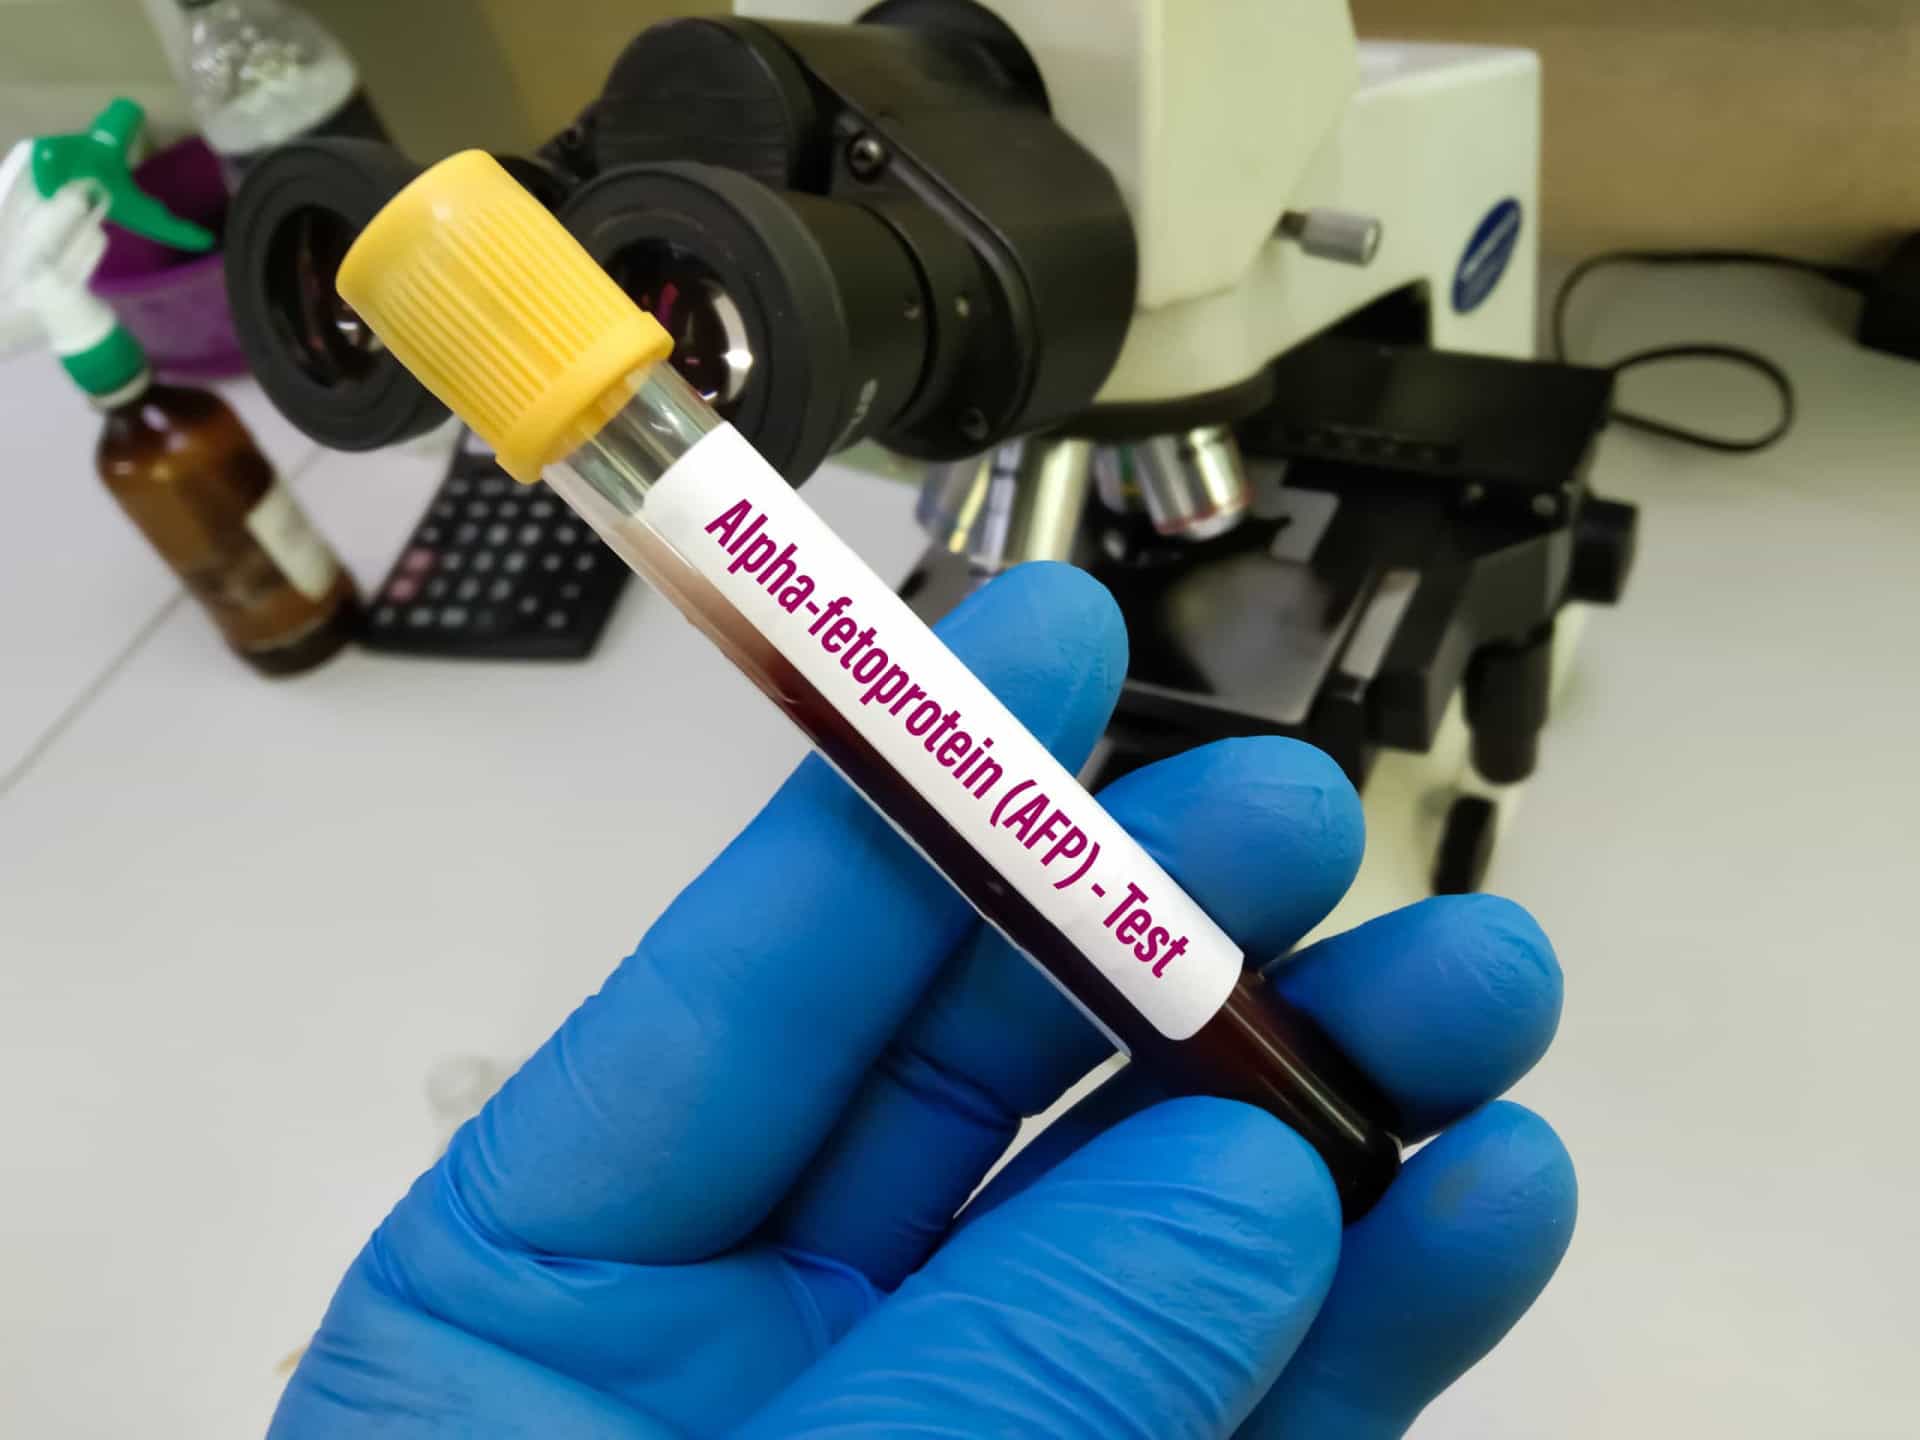 <p>There are two tests sometimes used to detect liver cancer. One is the alpha-fetoprotein blood test, and the other one is an ultrasound of the liver.</p><p><a href="https://www.msn.com/en-us/community/channel/vid-7xx8mnucu55yw63we9va2gwr7uihbxwc68fxqp25x6tg4ftibpra?cvid=94631541bc0f4f89bfd59158d696ad7e">Follow us and access great exclusive content everyday</a></p>